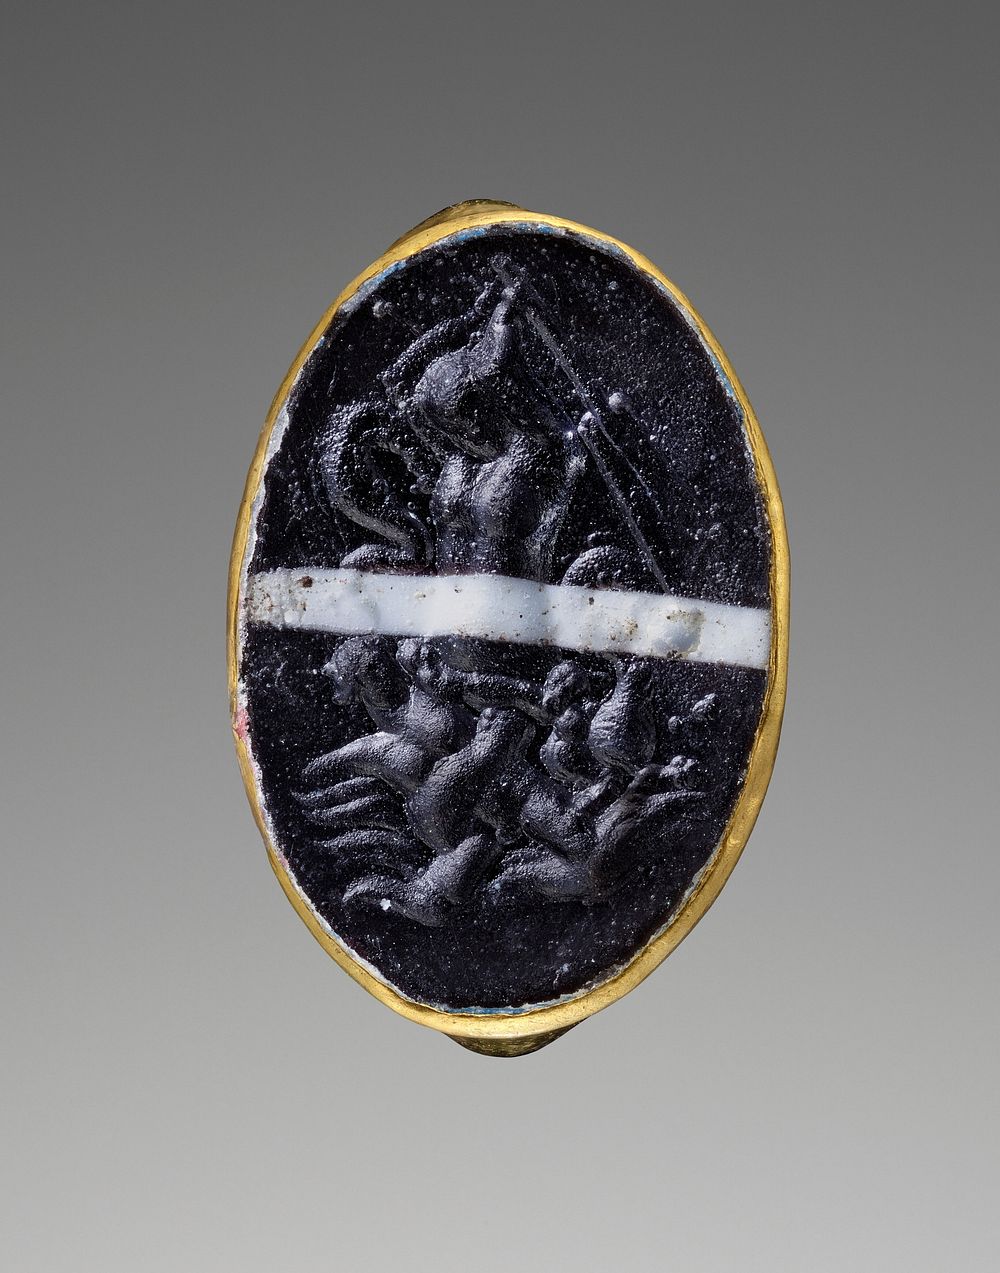 Cast Gem with Scylla attacking a Sailor set into a Ring